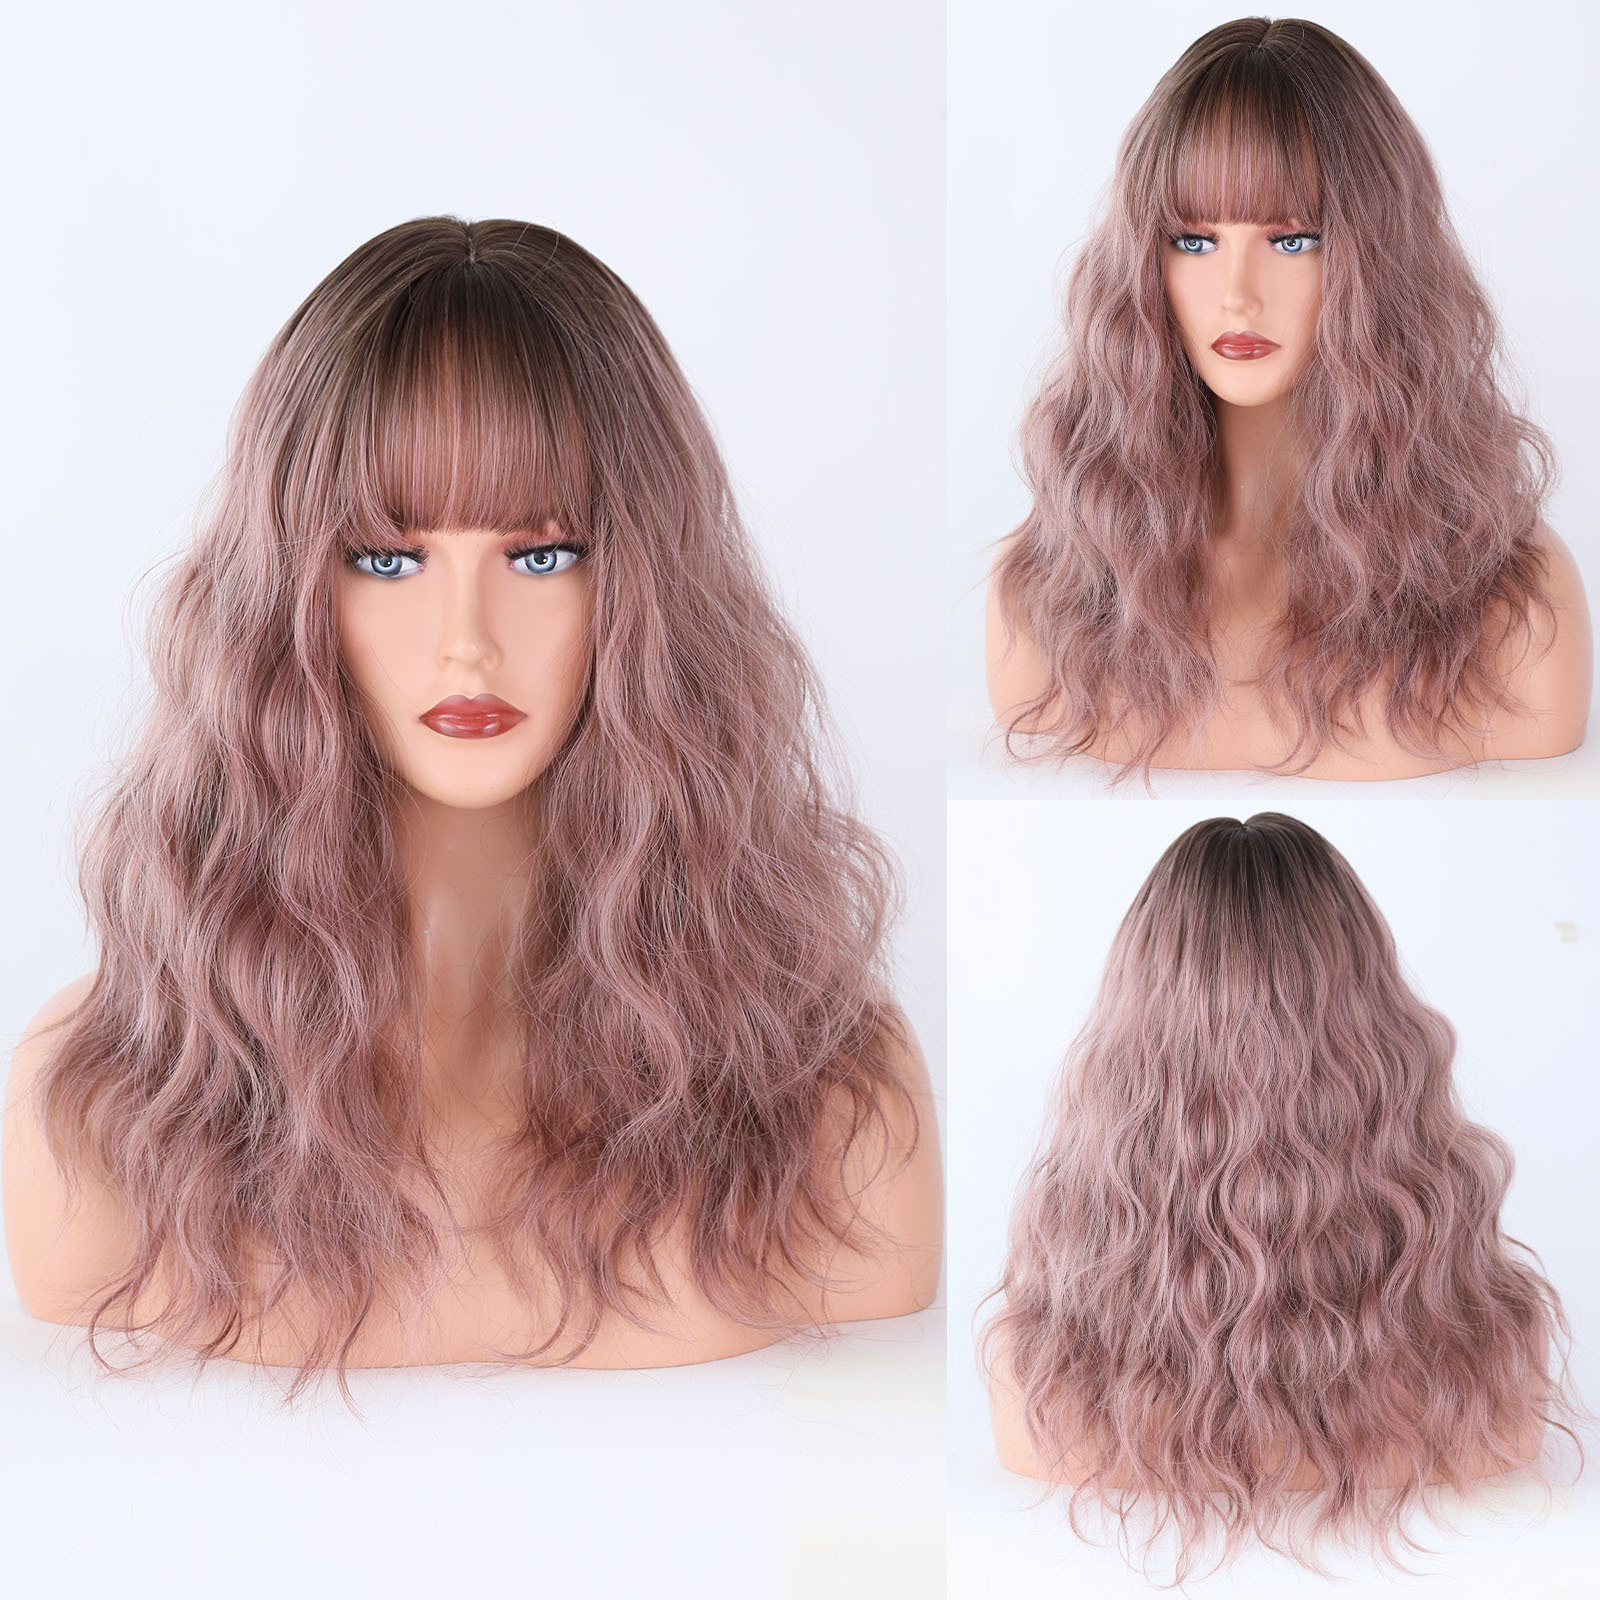 A trendy synthetic wig with female haze blue wavy medium hair, designed for a ready-to-go and fashionable style